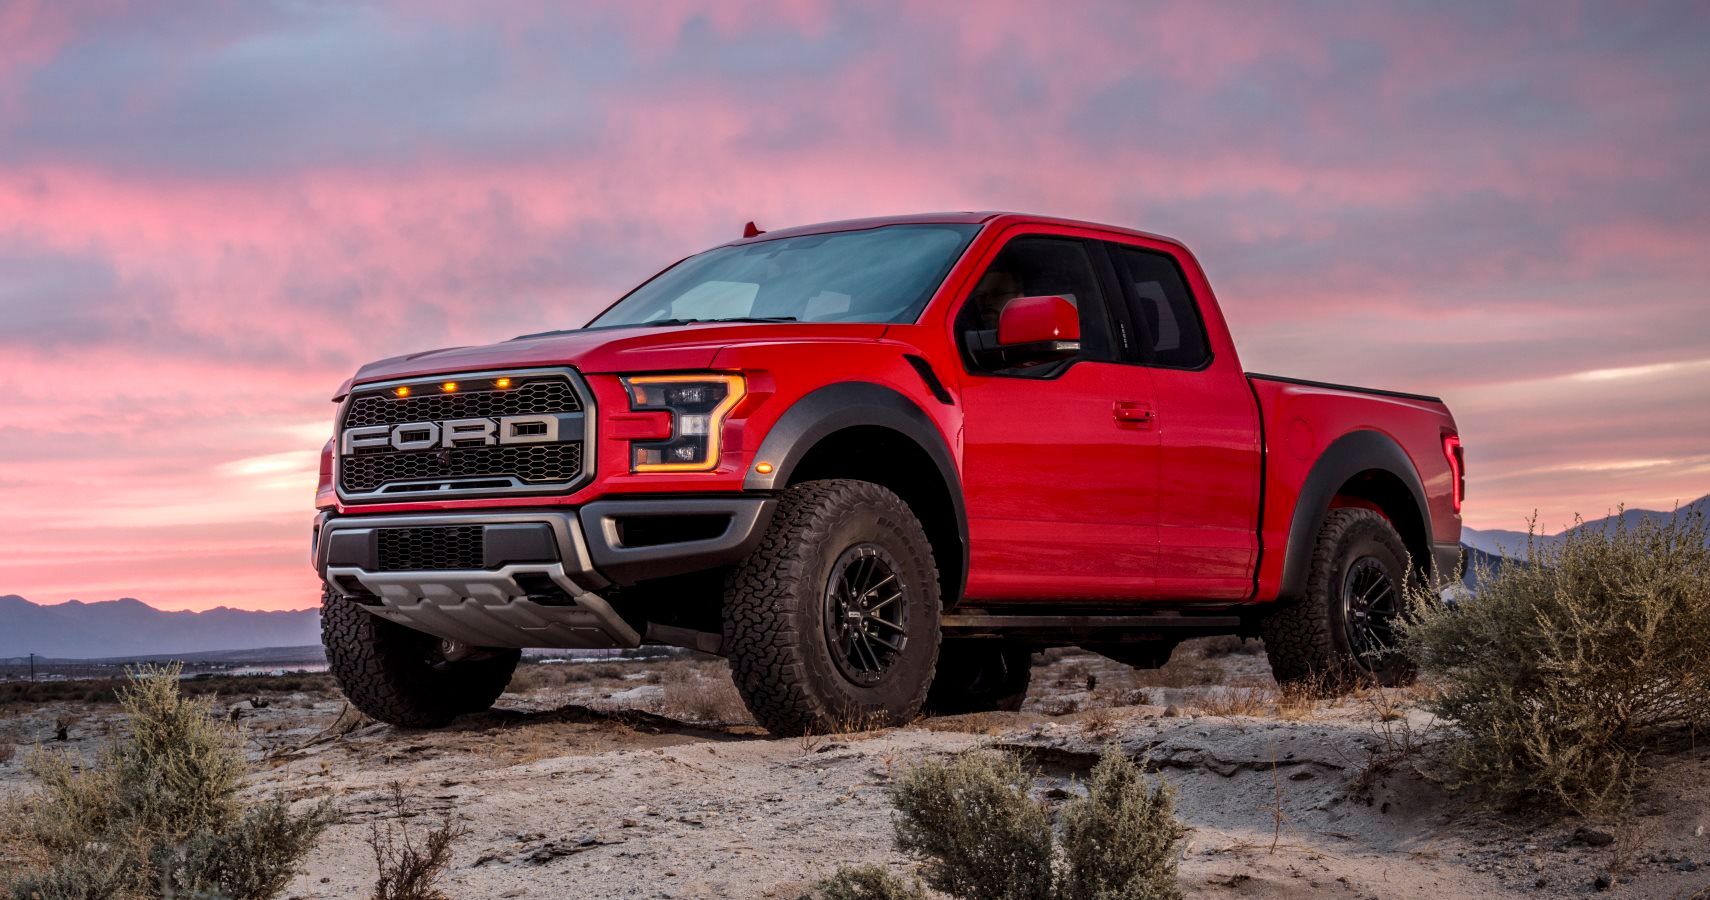 Ford is making its iconic F-150 Raptor – the ultimate high-performance off-road pickup – even better with upgraded technology including class-exclusive, electronically controlled FOX Racing Shox, new Trail Control™ and all-new Recaro sport seats.